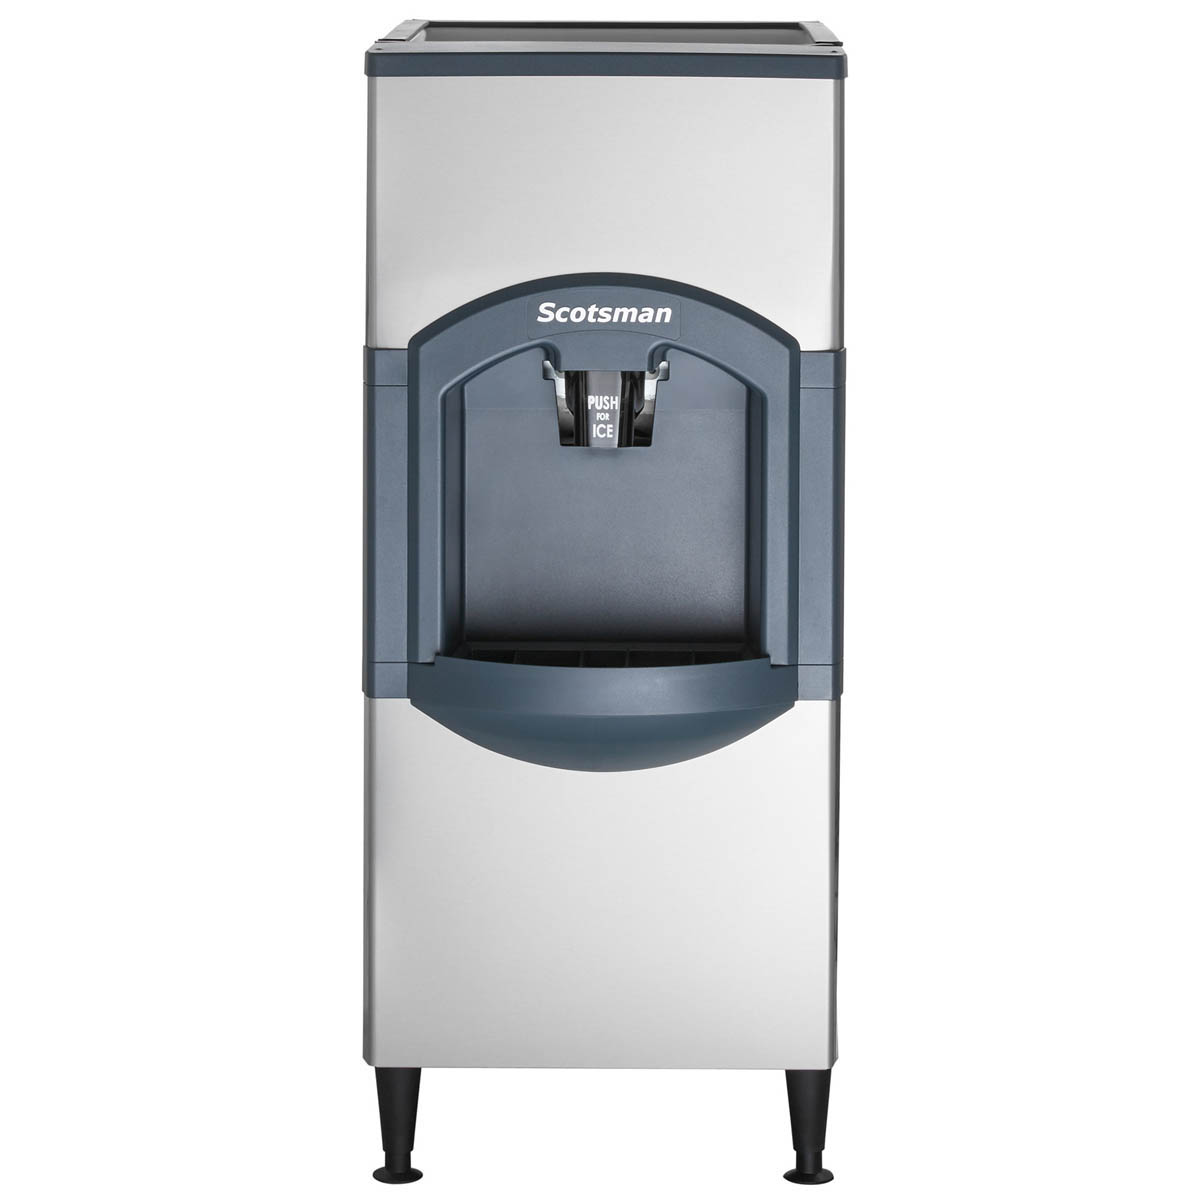 Scotsman HD22B-1 Serving Up Ice For Your Customers, Chef's Deal